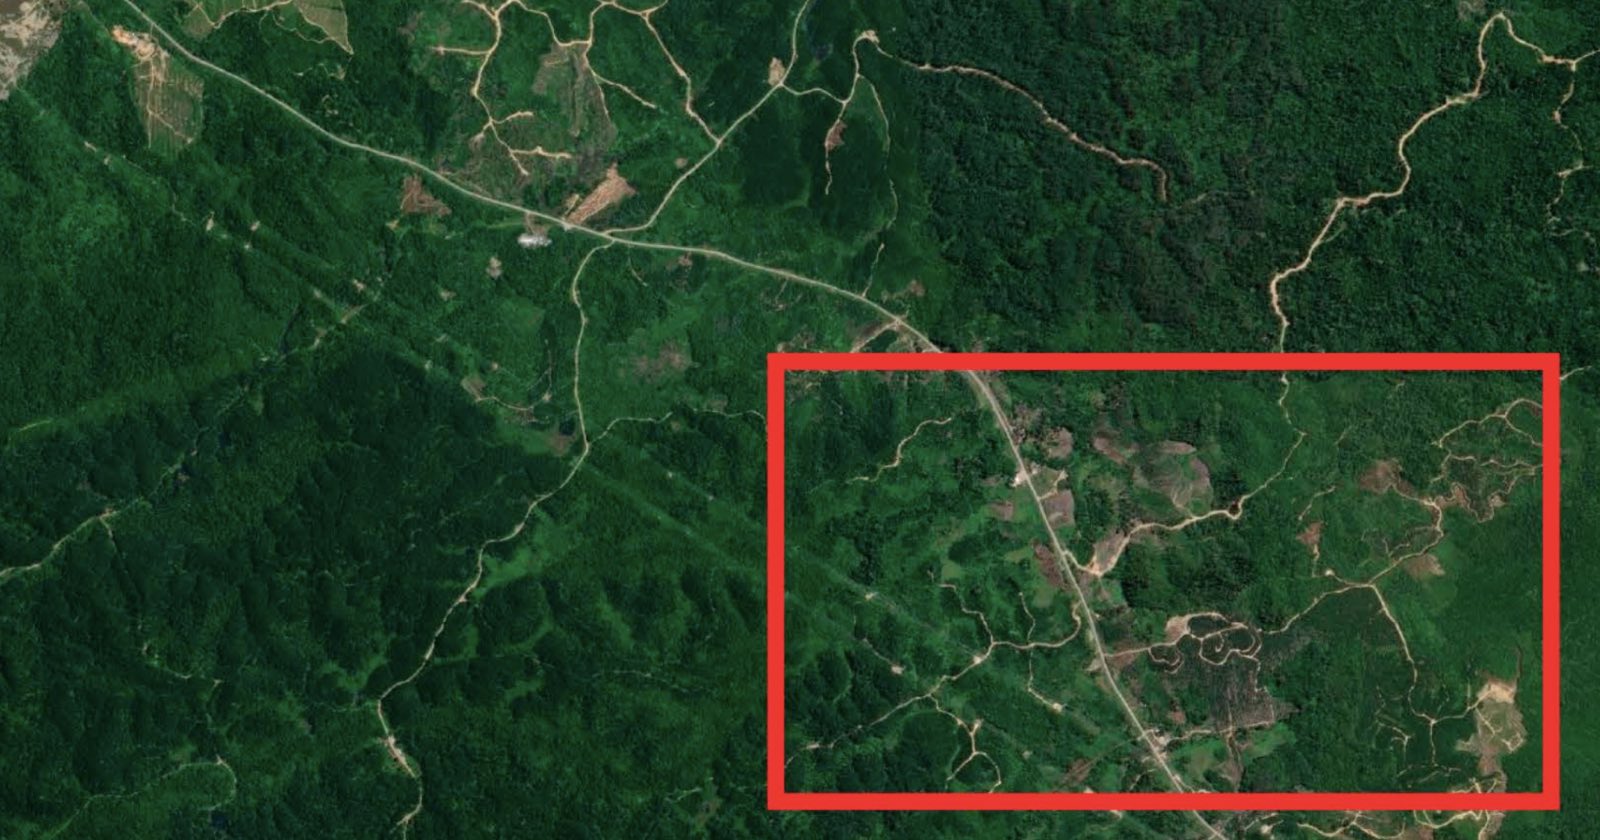 Satellite Photos and AI Combine to Reveal Secret Roads Damaging Rainforests